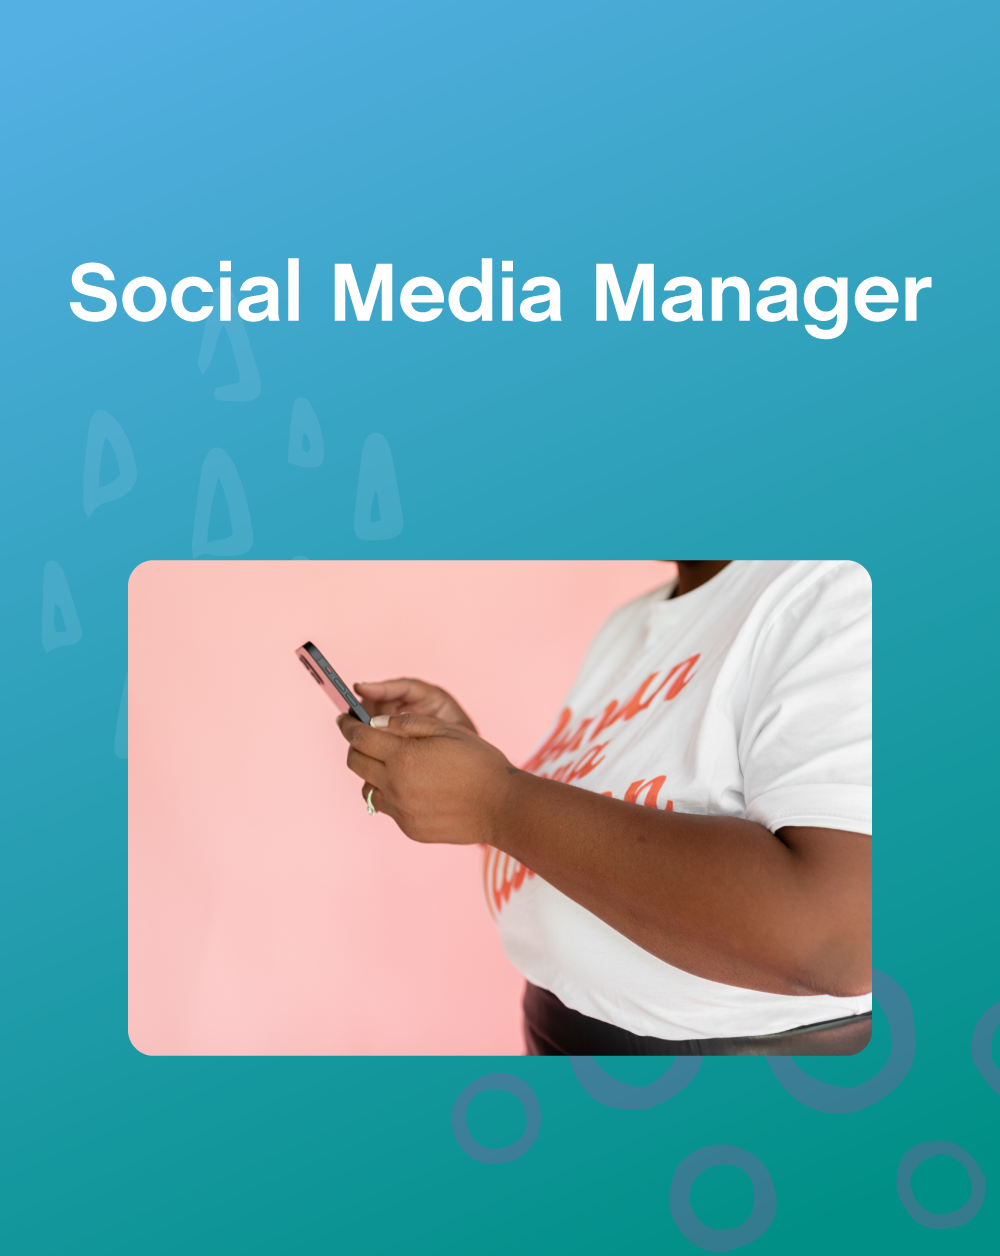 Social Media Manager Contract Template - The Contract Shop®